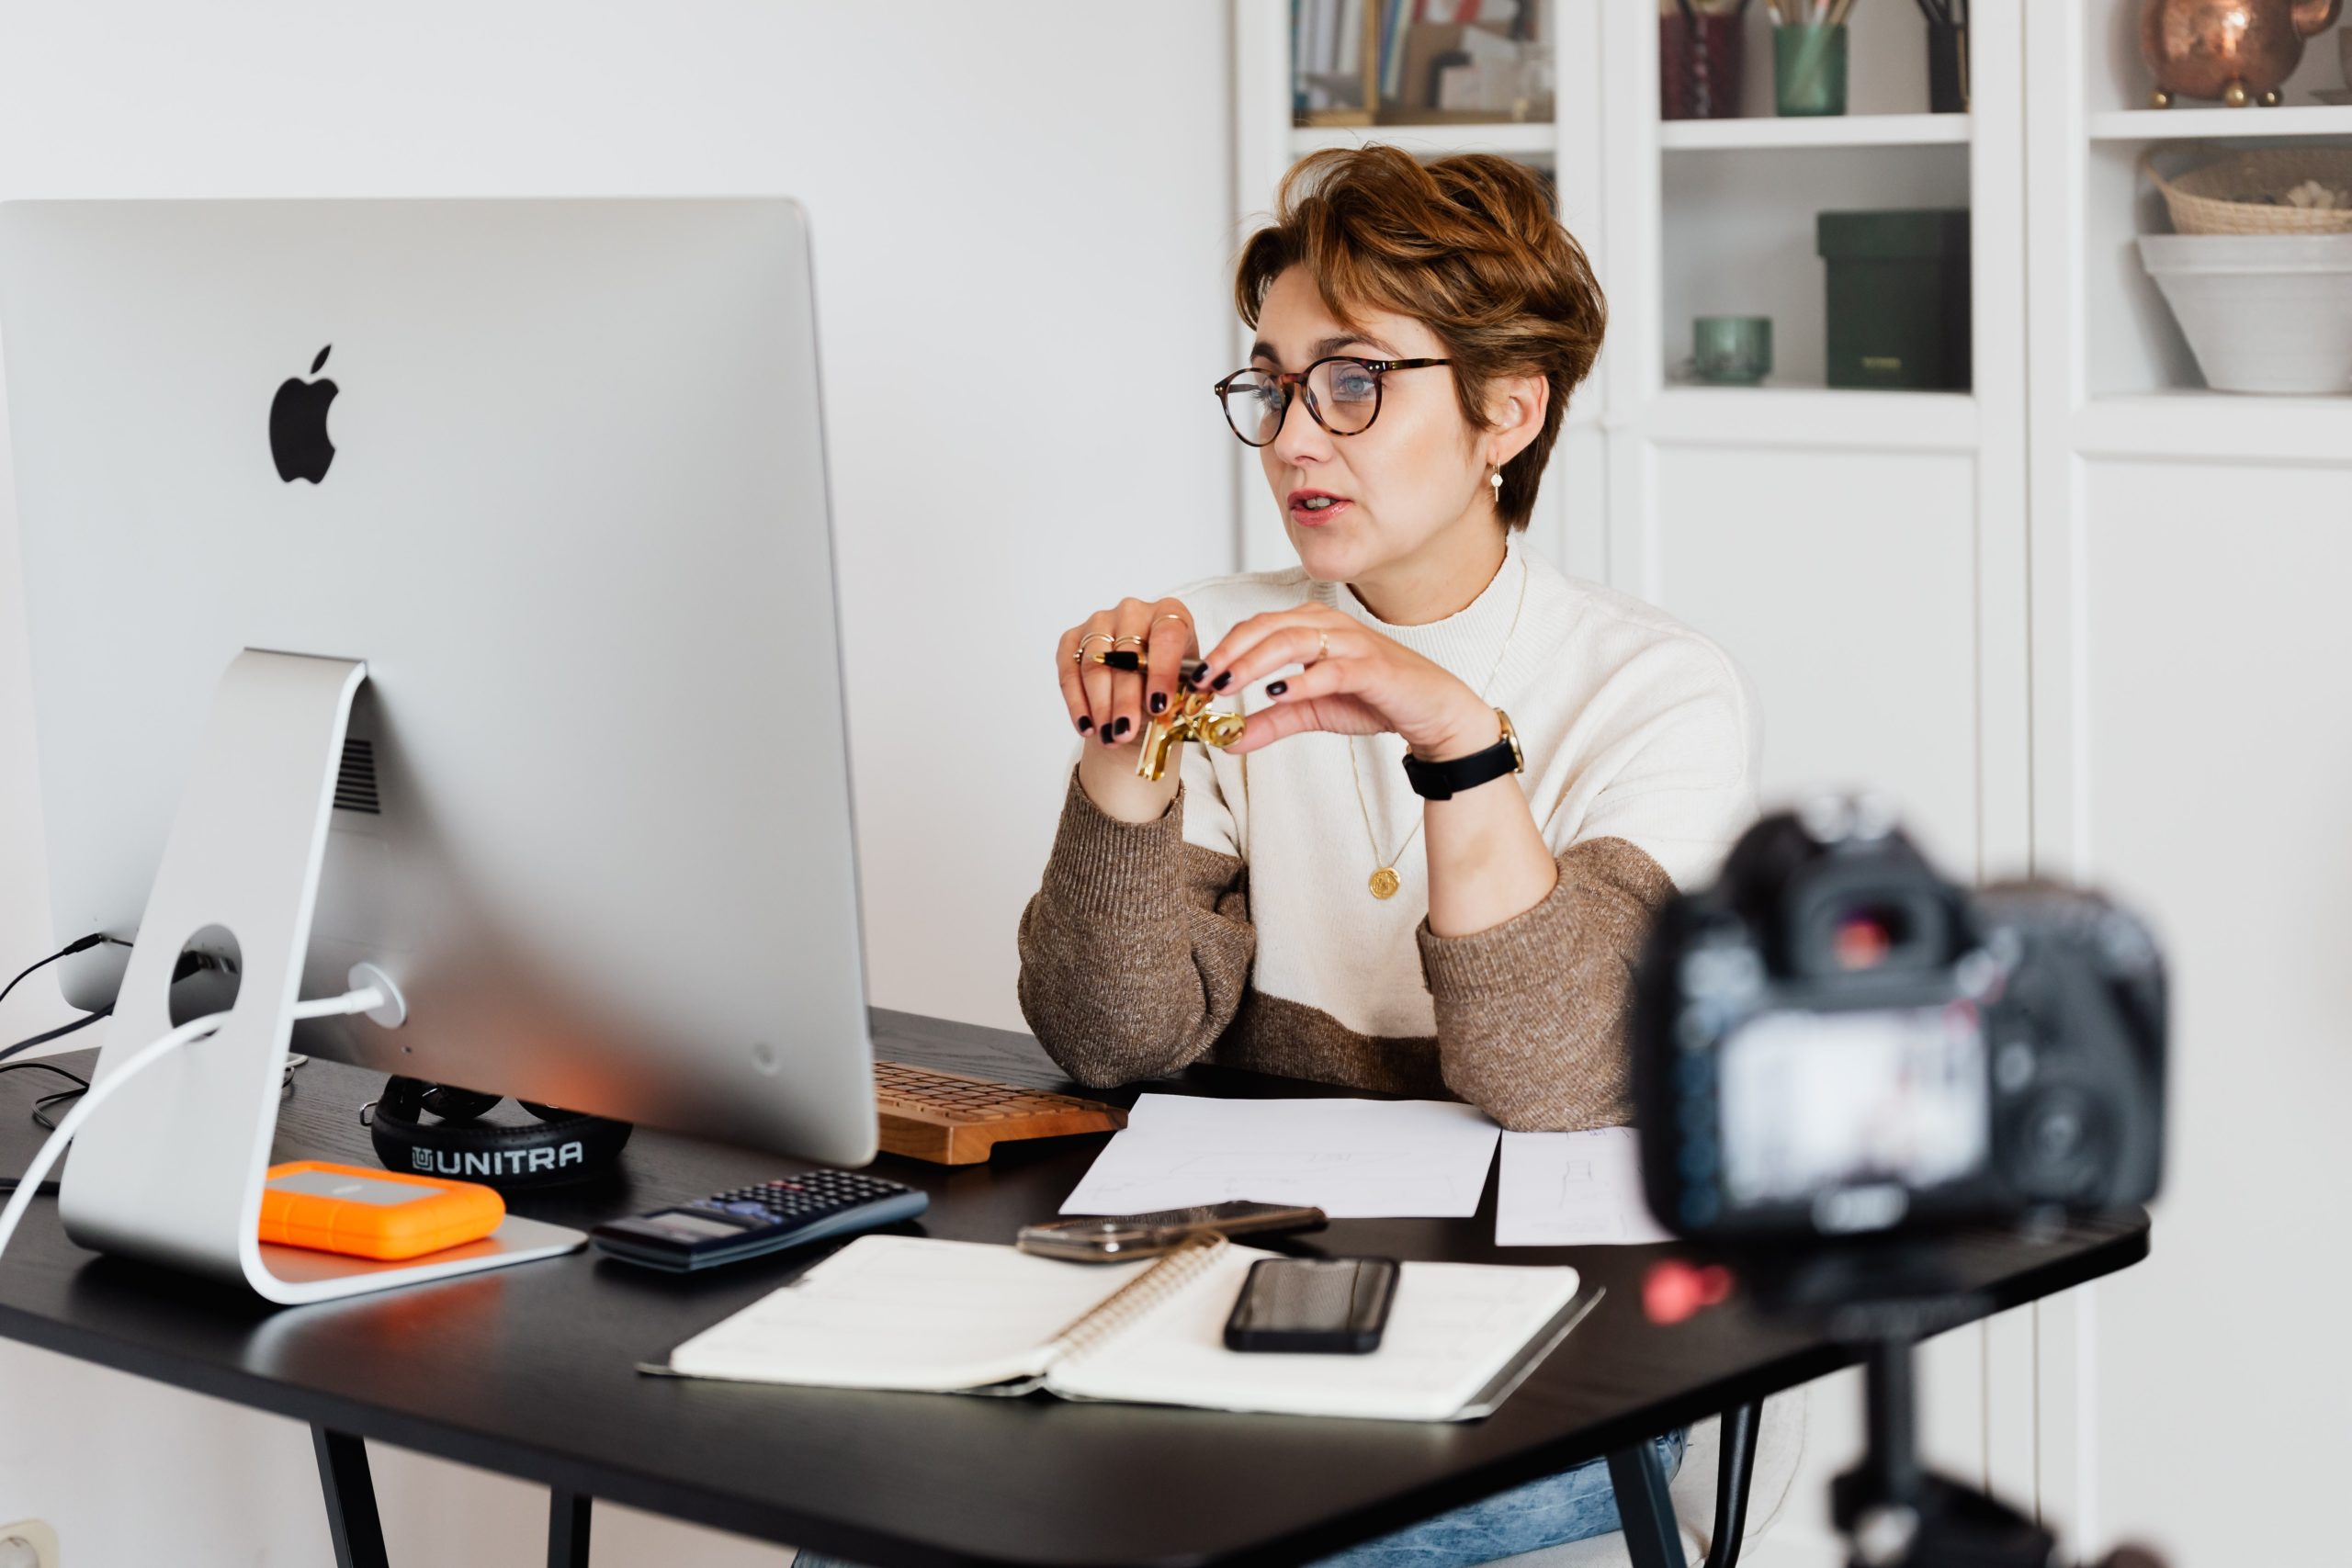 A professional woman sitting at her desk, being filmed.